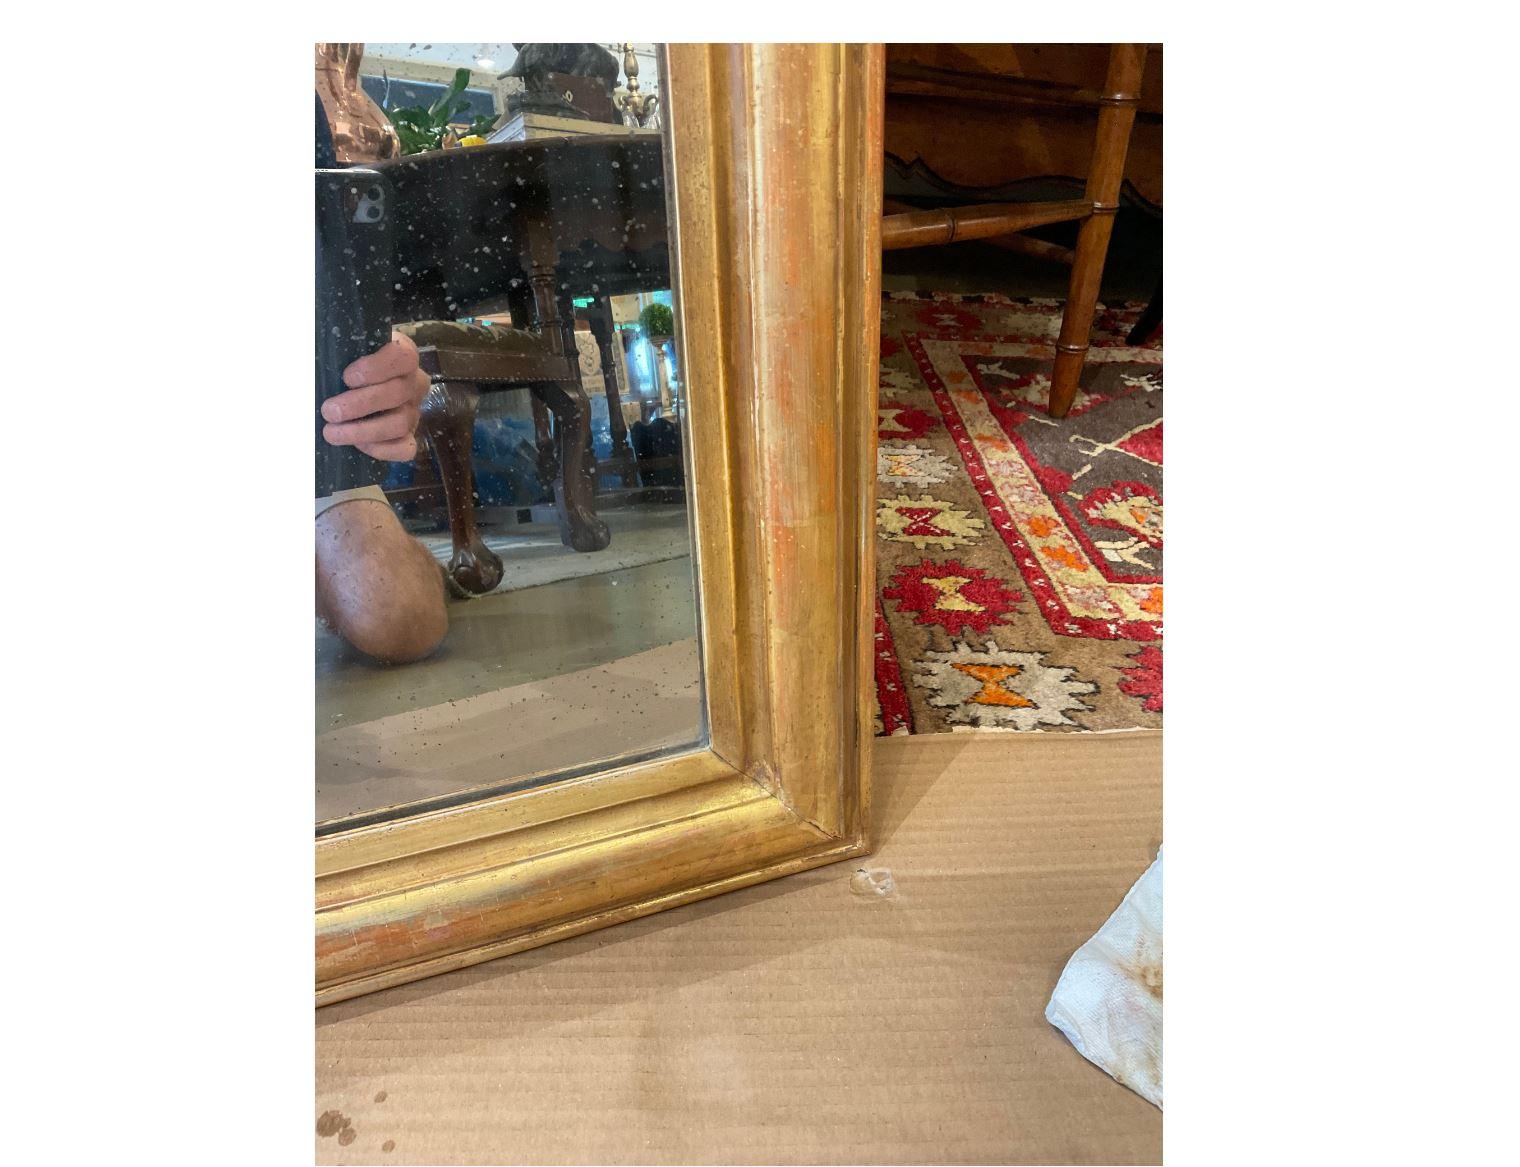 A stunning 19th century French Louis Philippe mirror. This mirror is all original including its glass. Its gold gilt goes all around and is worn away reveling the red under coat indicates its true age. A mirror like this makes such a statement and